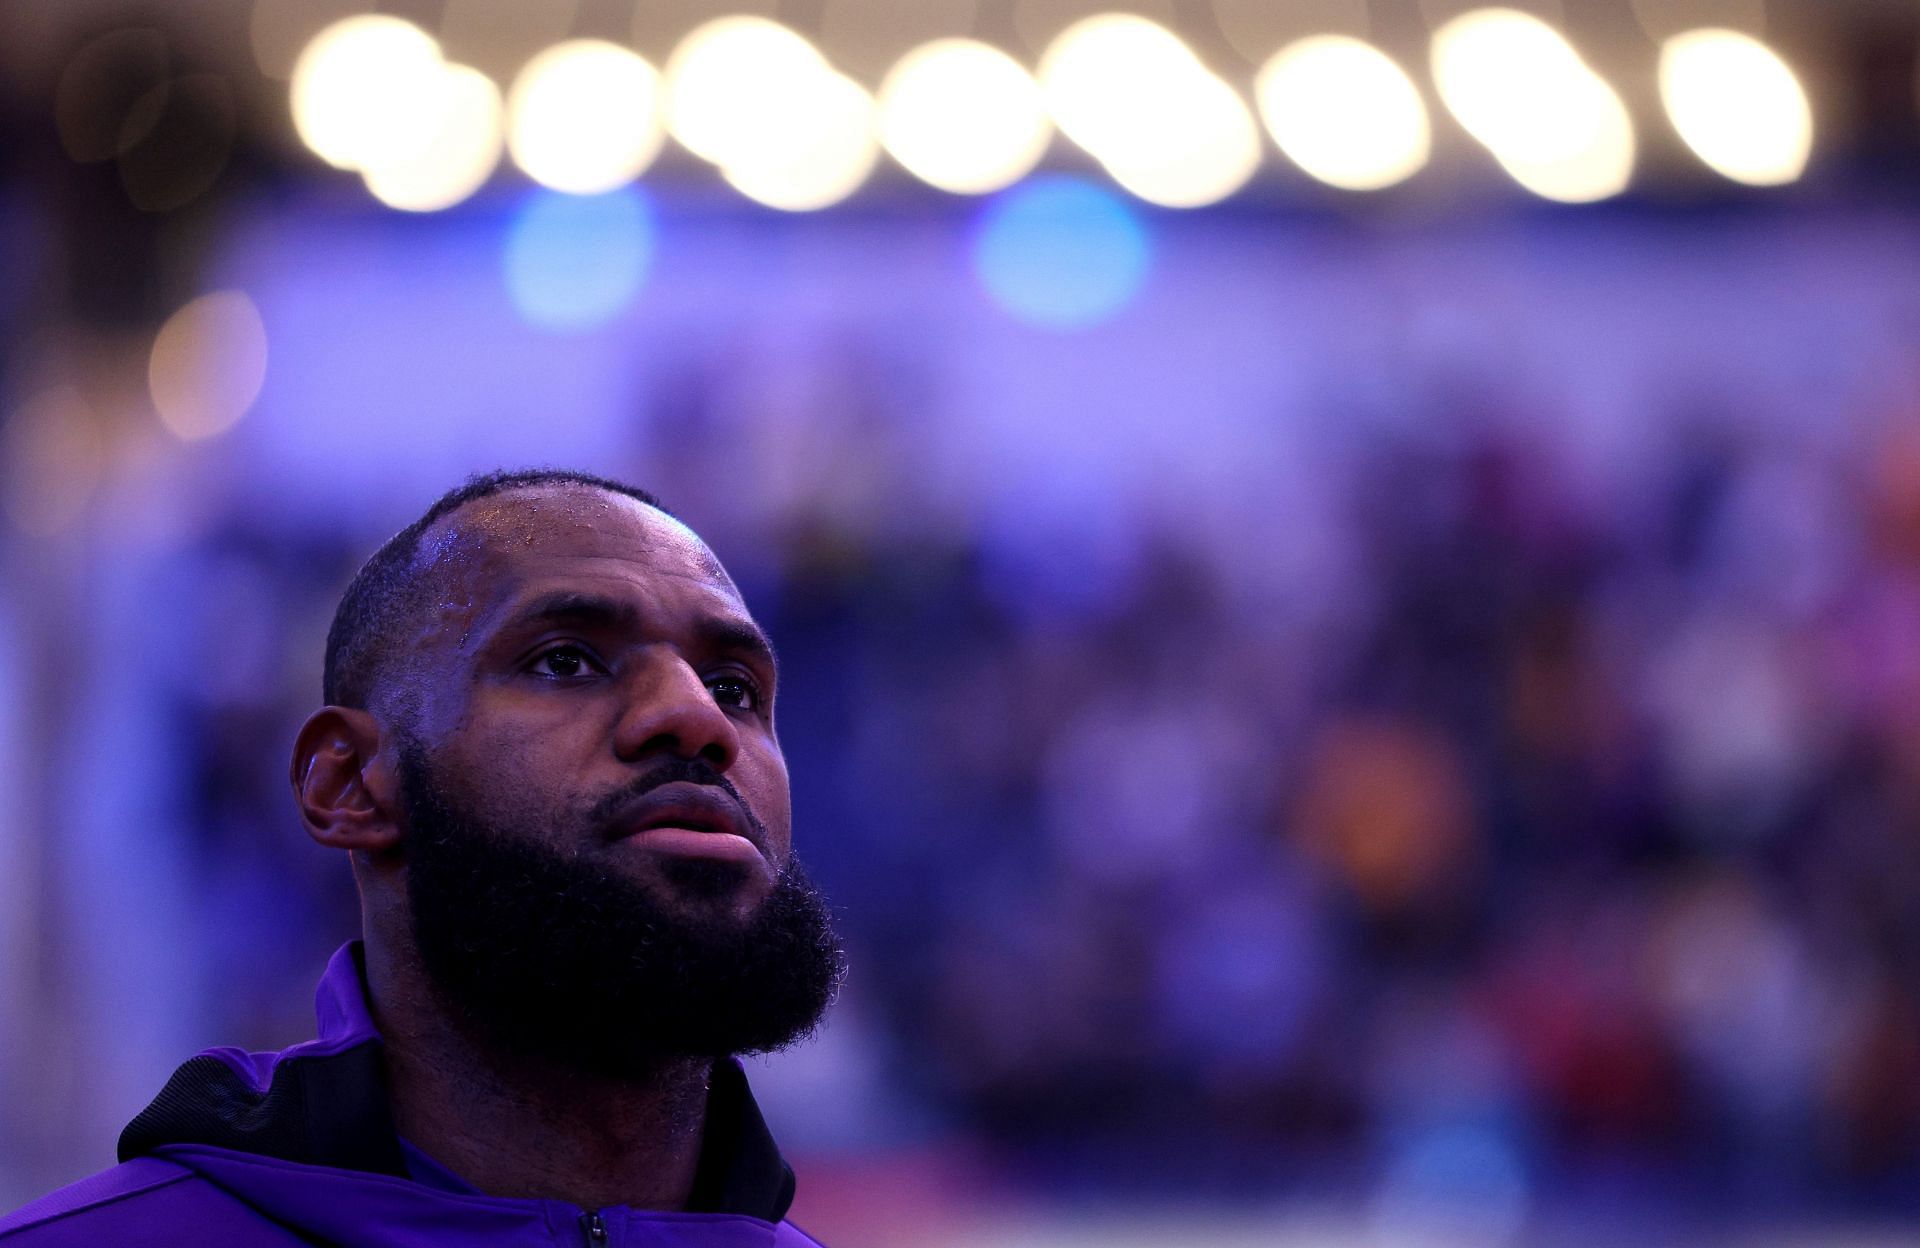 LeBron James #6 of the Los Angeles Lakers before the 124-116 OT win against the Indiana Pacers